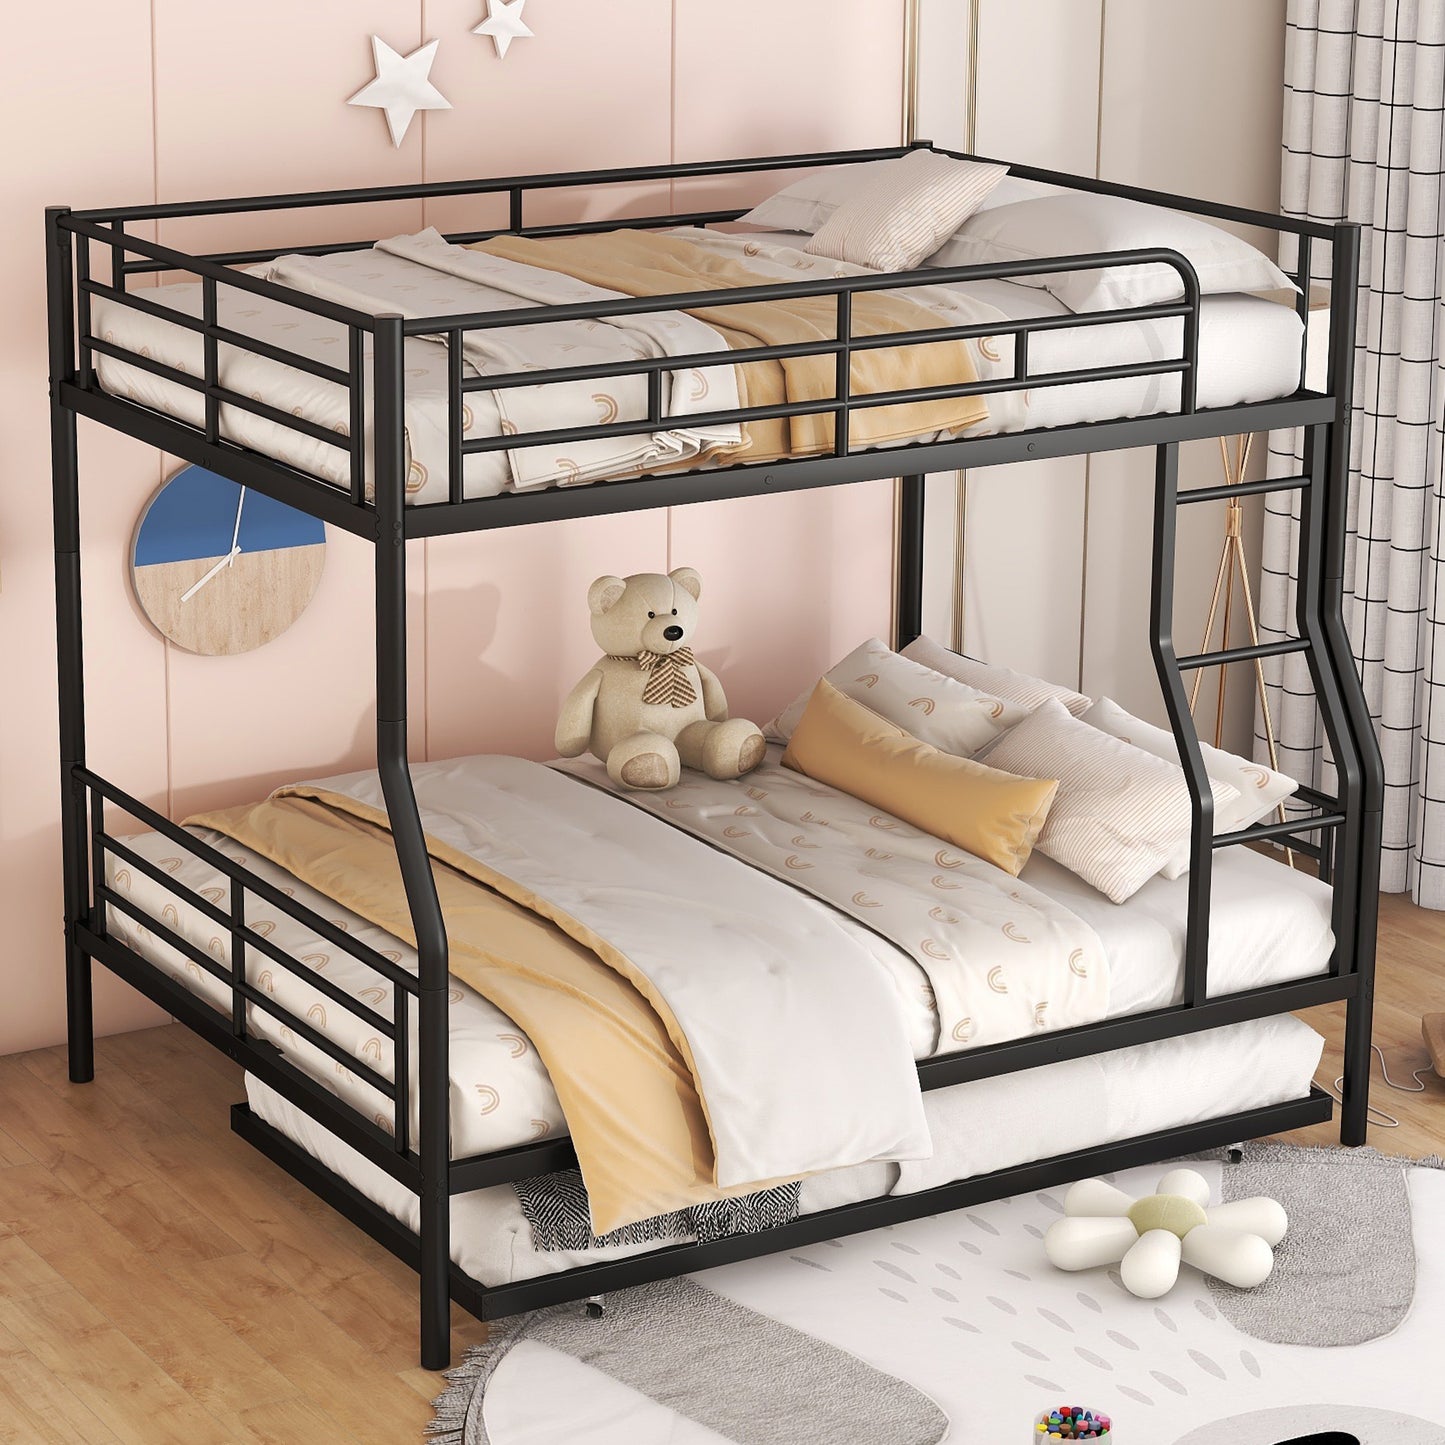 BTMWAY Full XL Over Queen Metal Bunk Bed with Trundle, Convertible Metal Bunk Bed Frame for Dorm Bedroom, Super Large Size Bunk Bed for Kids Boys Girls, No Box Spring Needed, Black